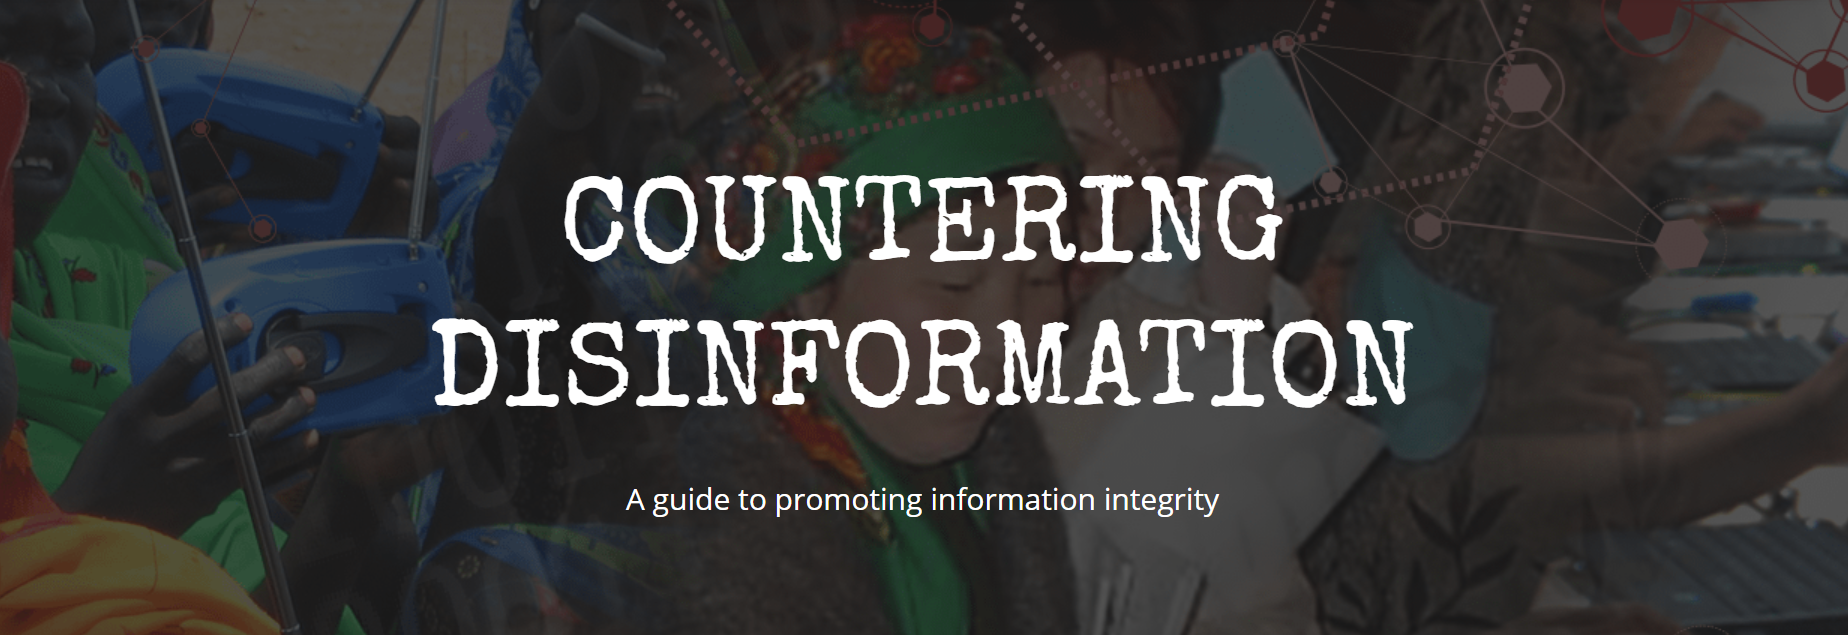 Countering Disinformation: A guide to promoting information integrity